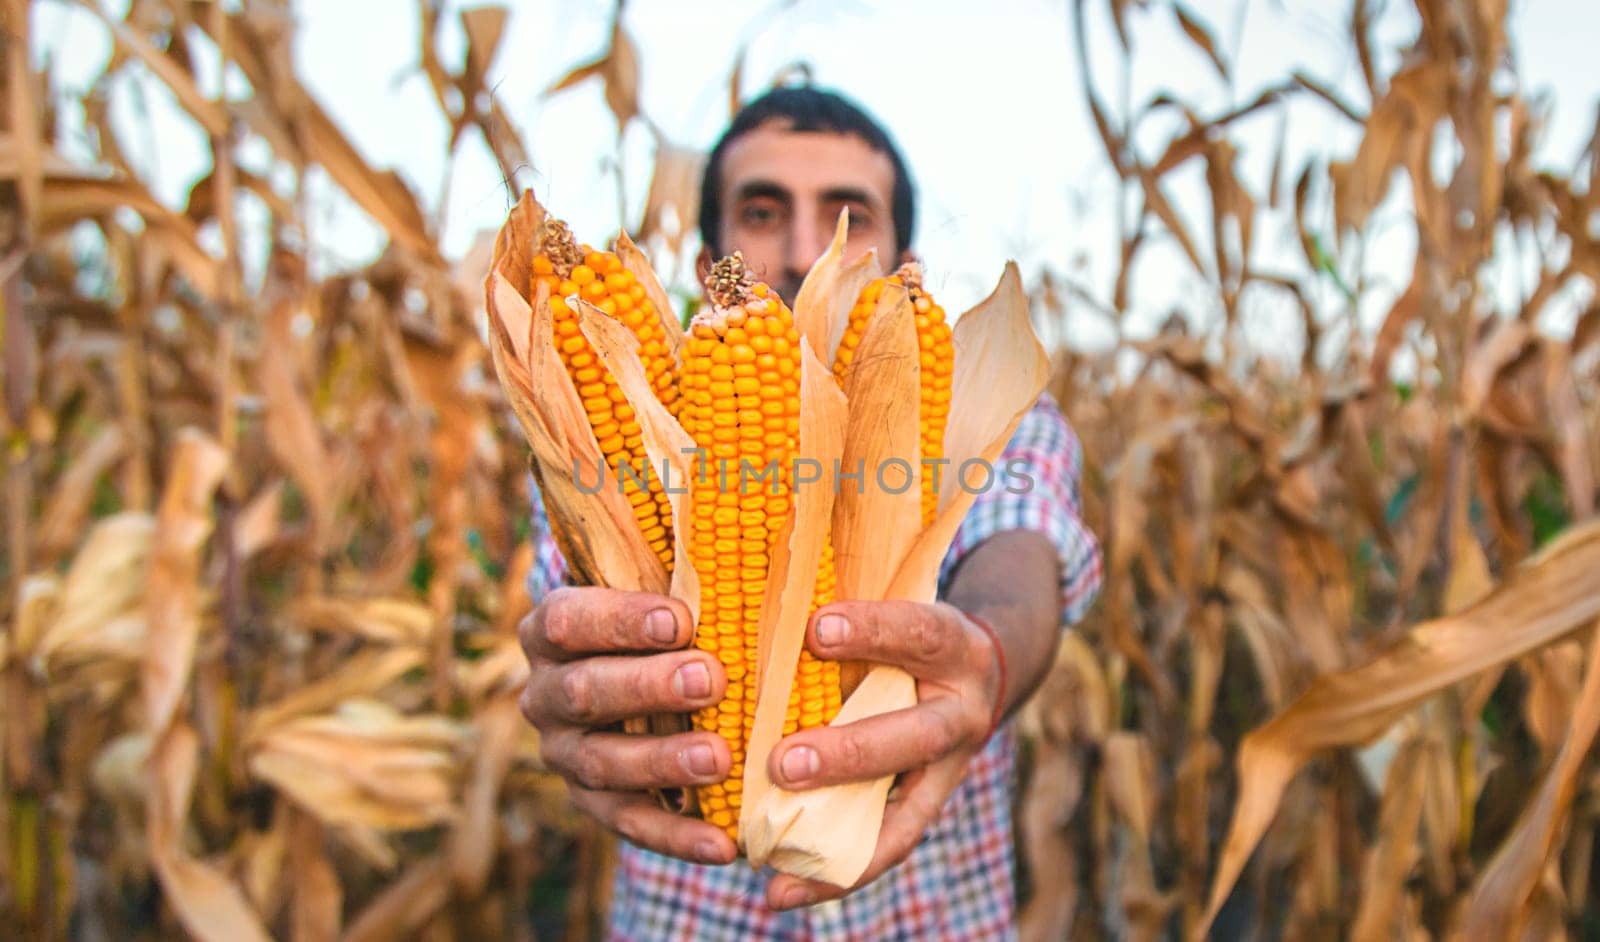 Corn harvest in the hands of a farmer. Selective focus. food.